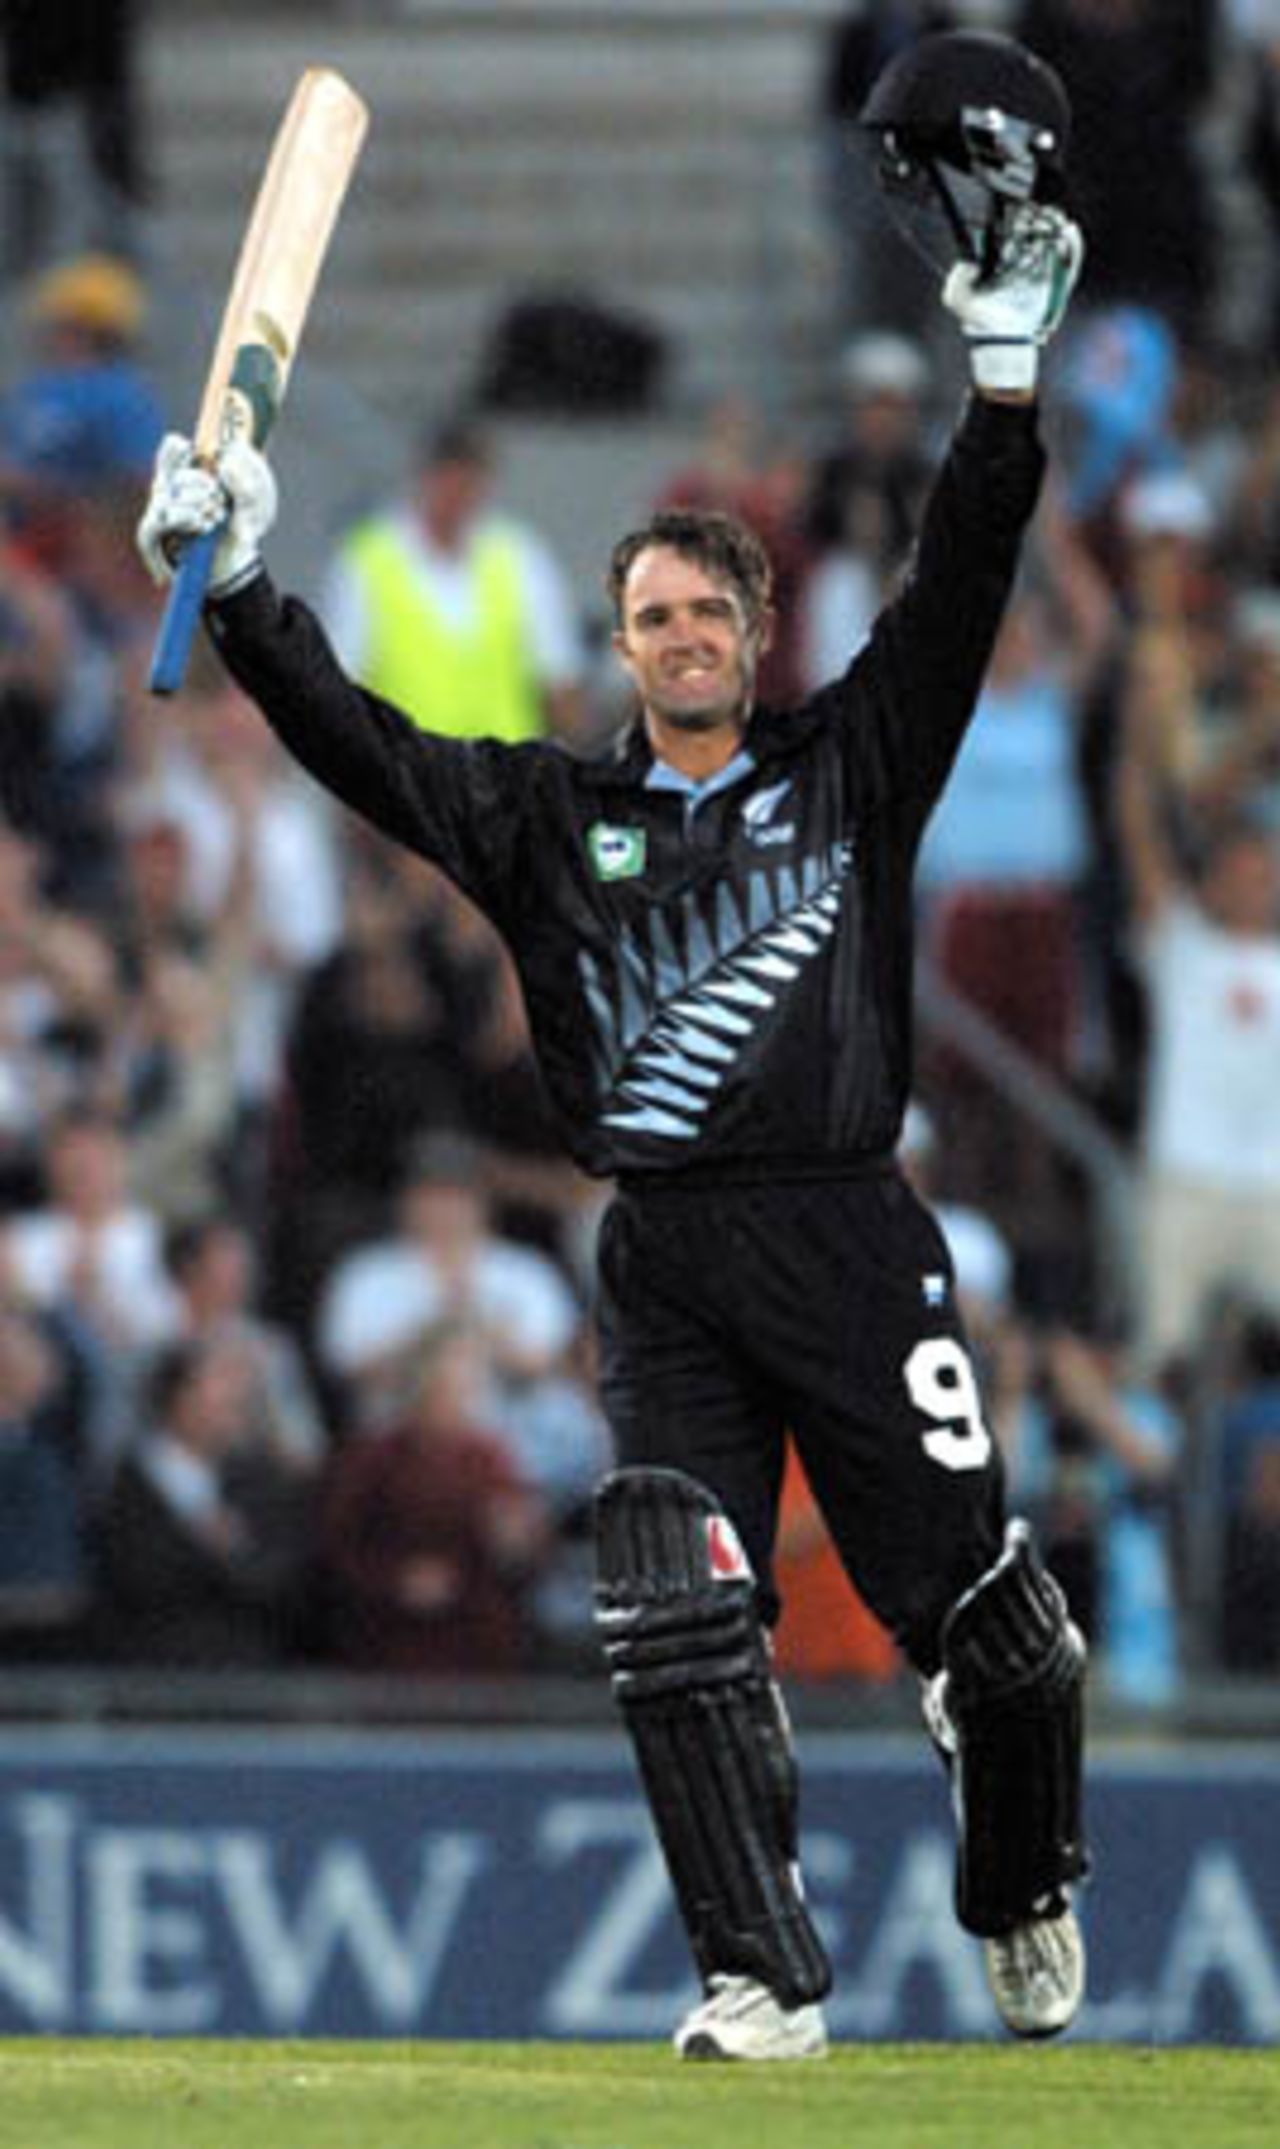 New Zealand opening batsman Nathan Astle raises his bat to the crowd in celebration of reaching his ninth One-Day International century off 93 balls. Man of the Match Astle went on to score 119. 5th One-Day International: New Zealand v Pakistan, Carisbrook, Dunedin, 28 February 2001.